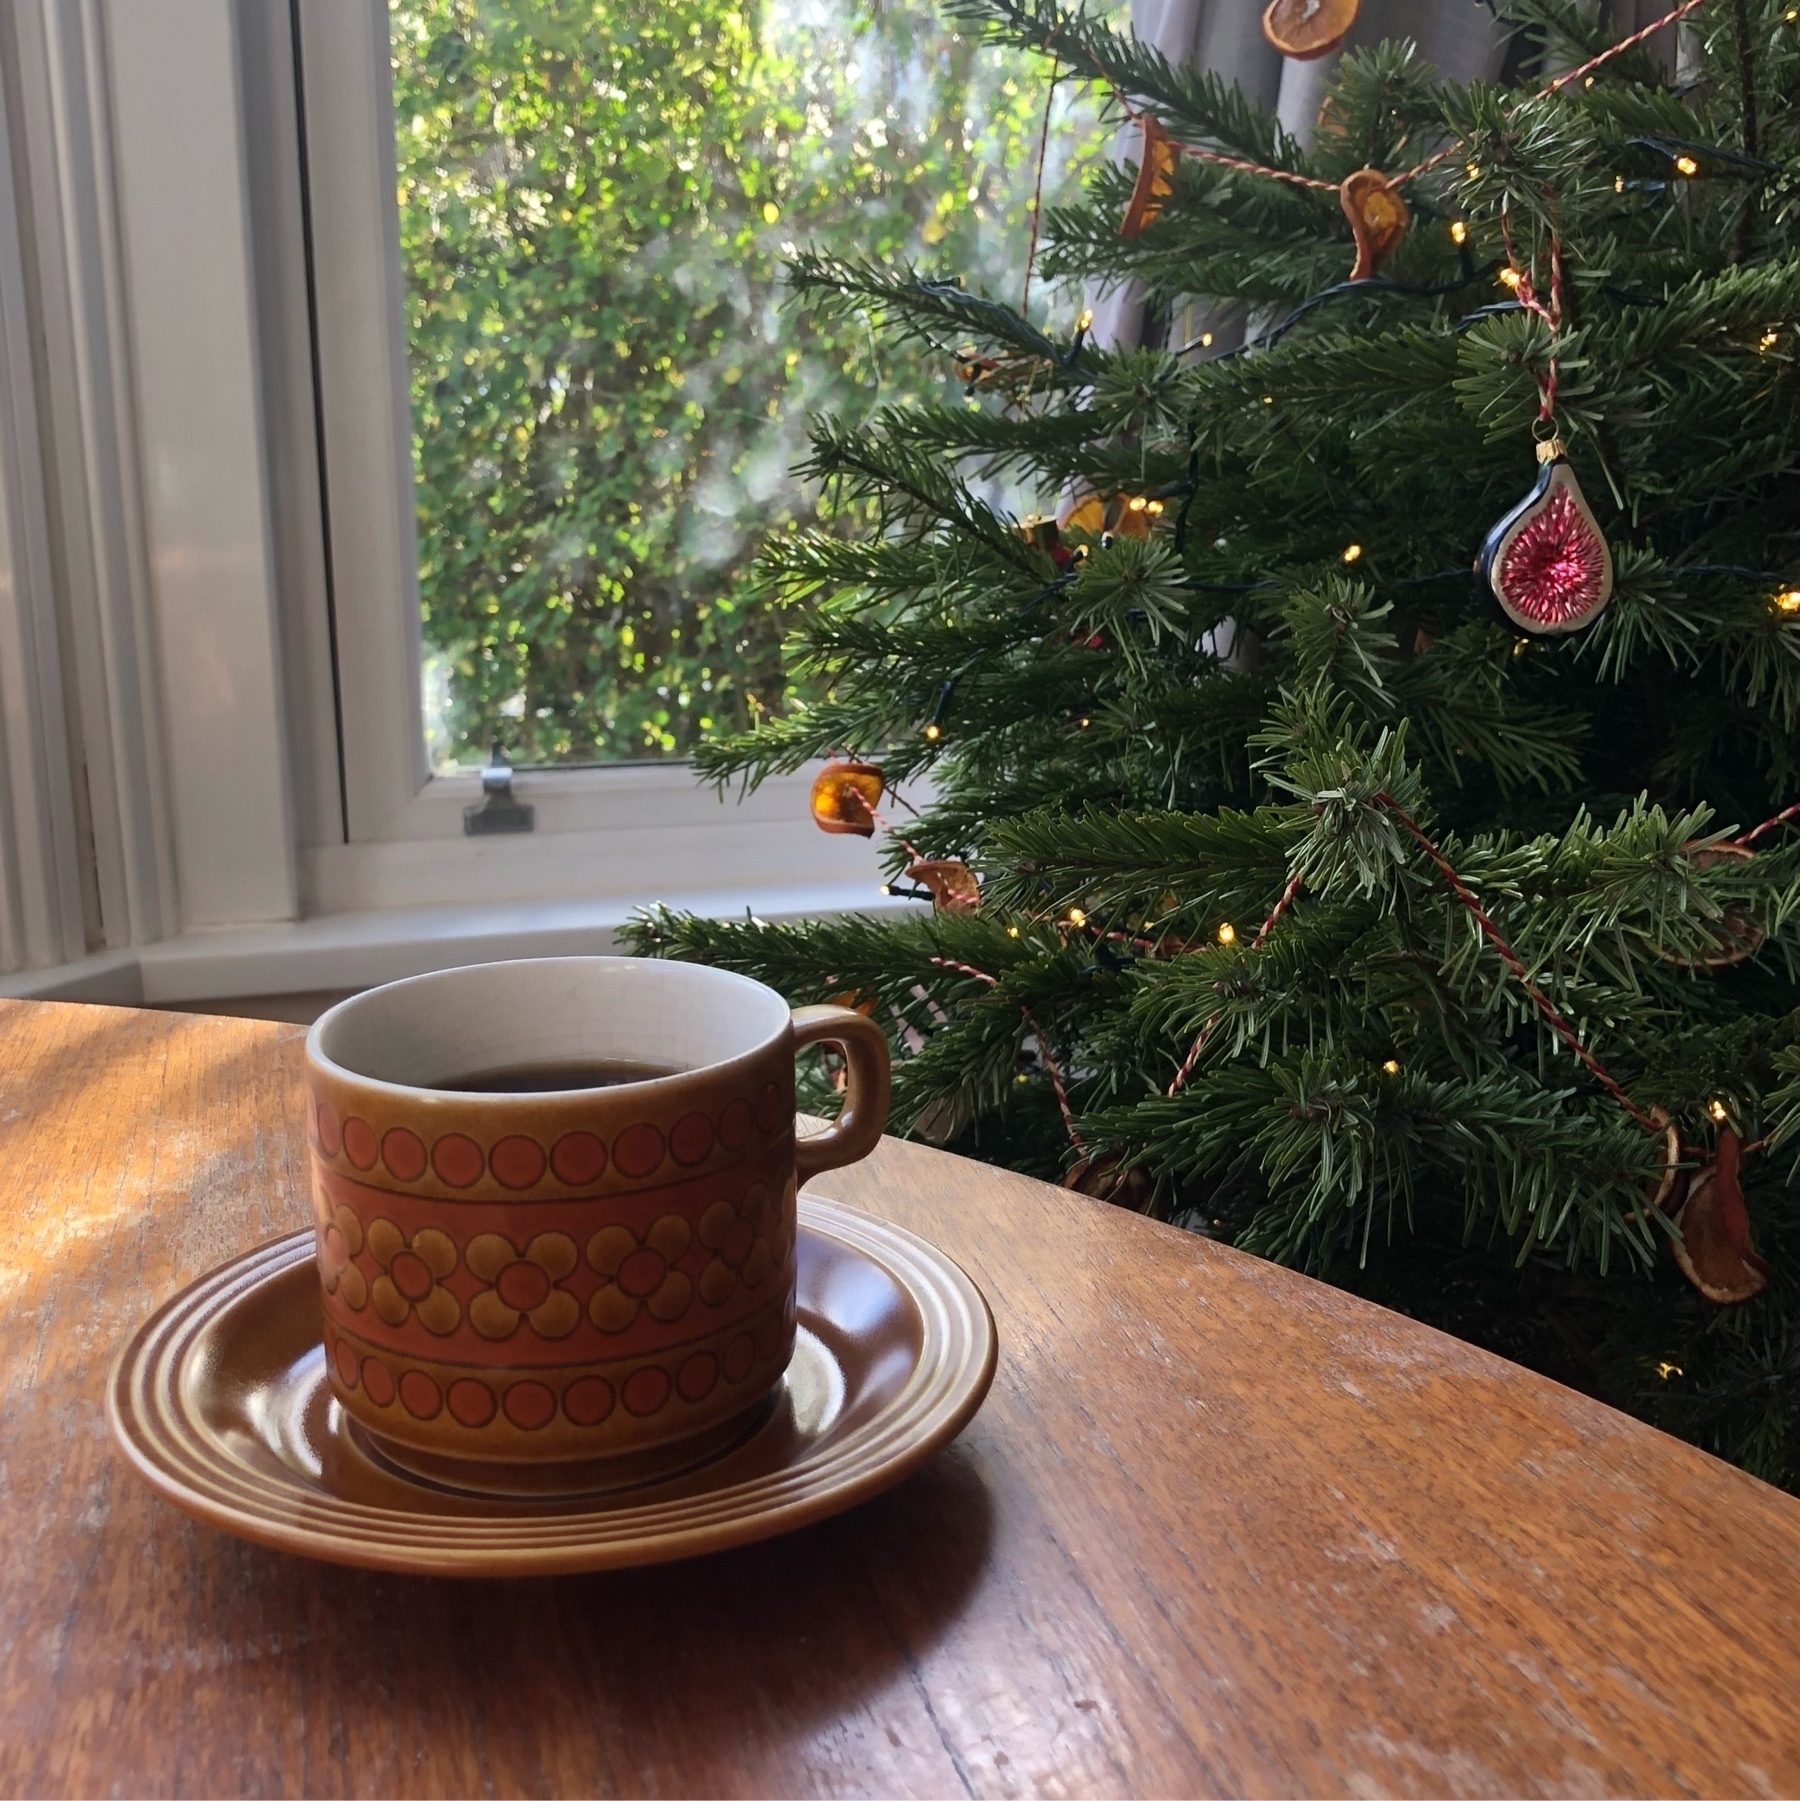 brown coffee cup and saucer next to the christmas tree